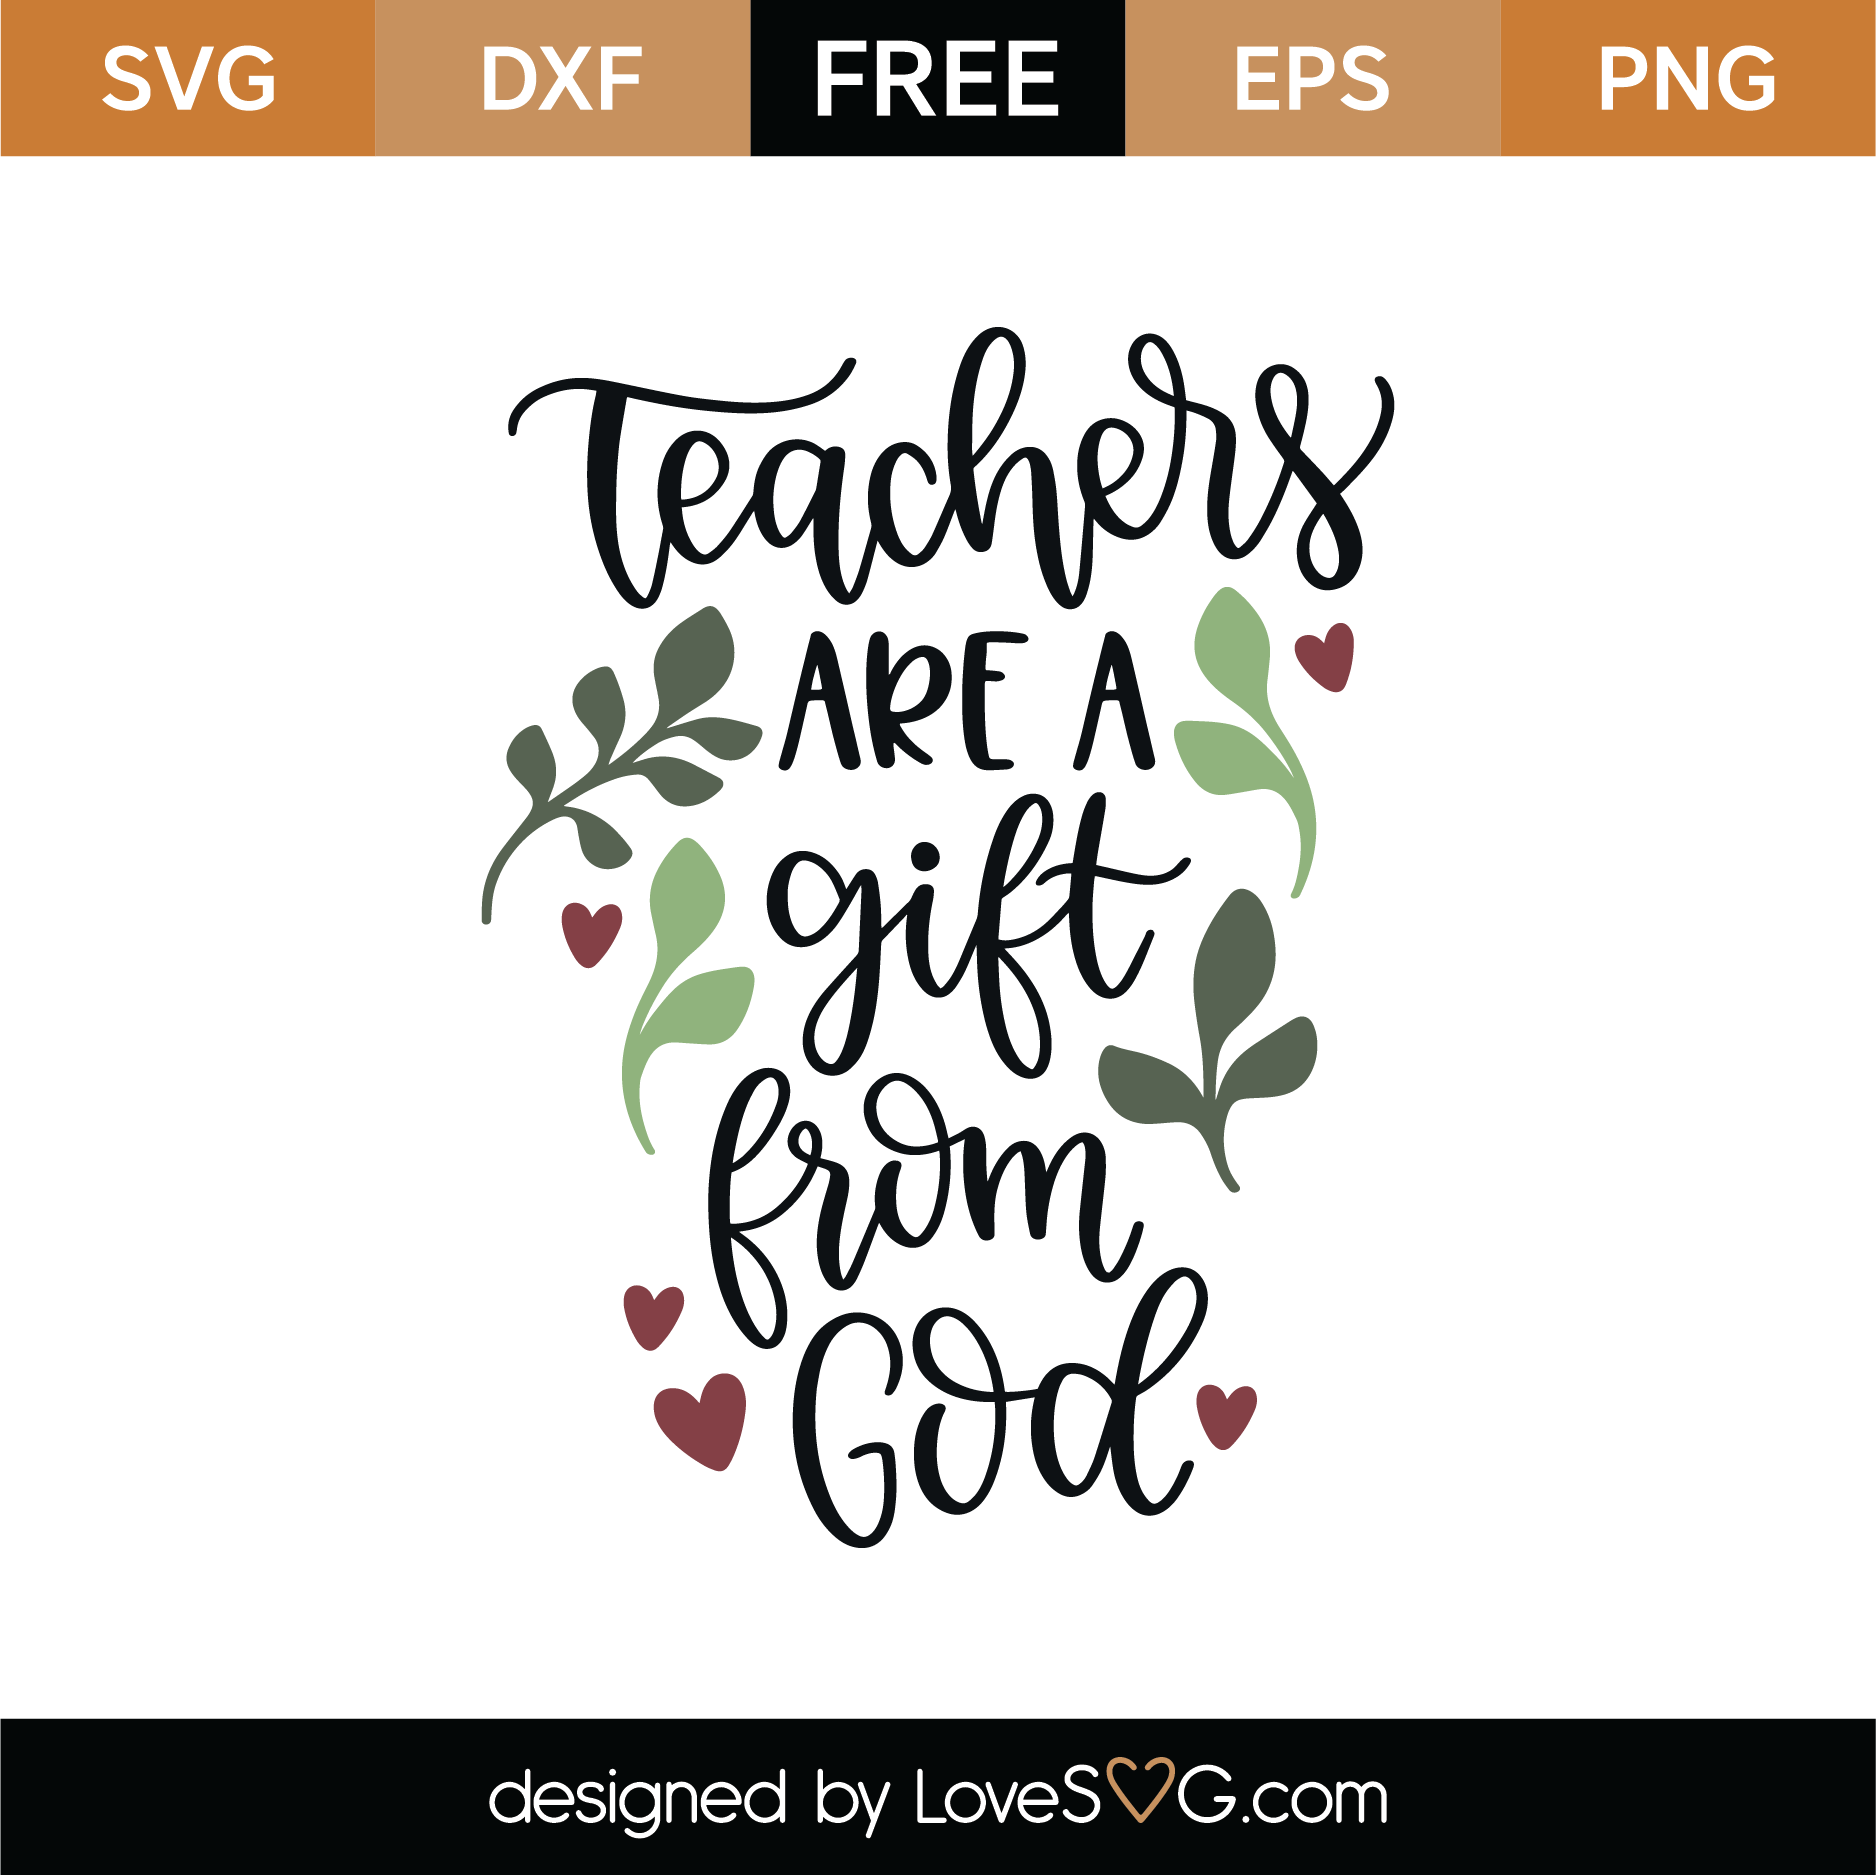 Free Teachers Are A Gift From God SVG Cut File | Lovesvg.com